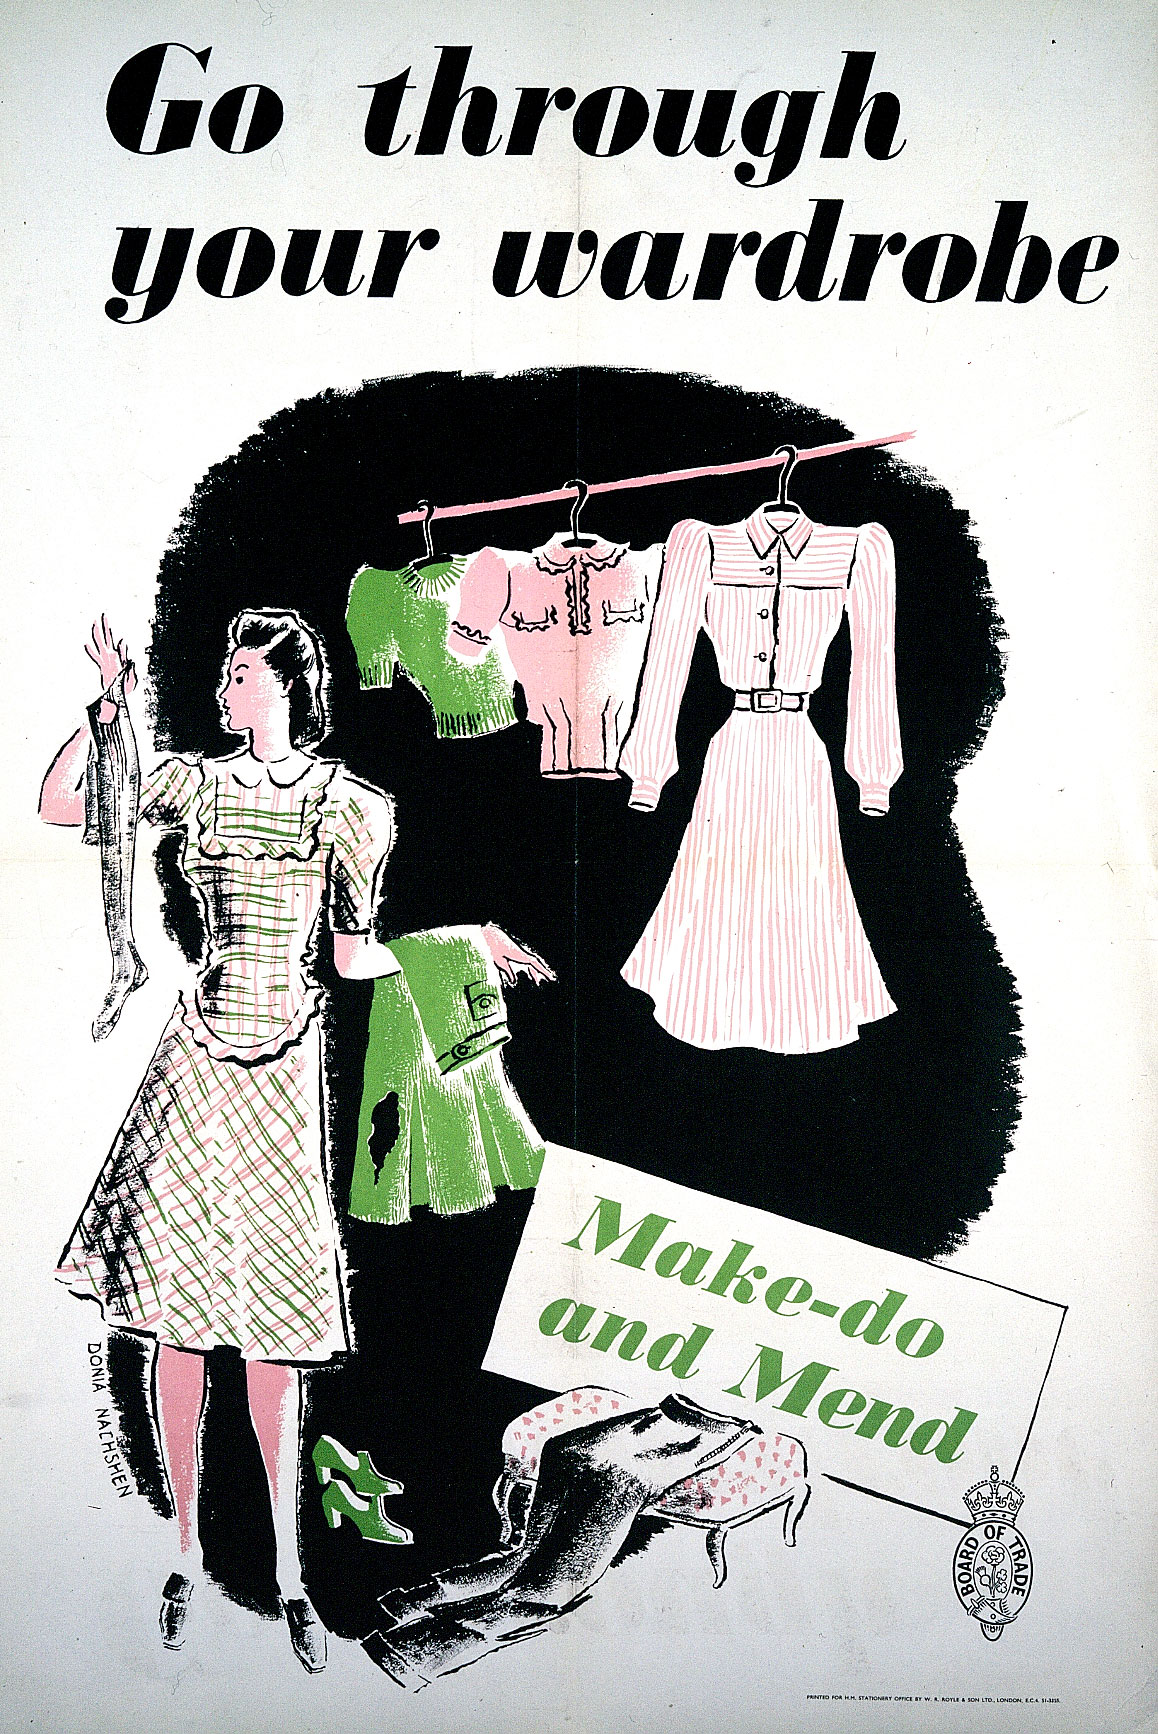 Poster with an illustration of a woman next to a rack of clothing, holding up some garments and inspecting them.